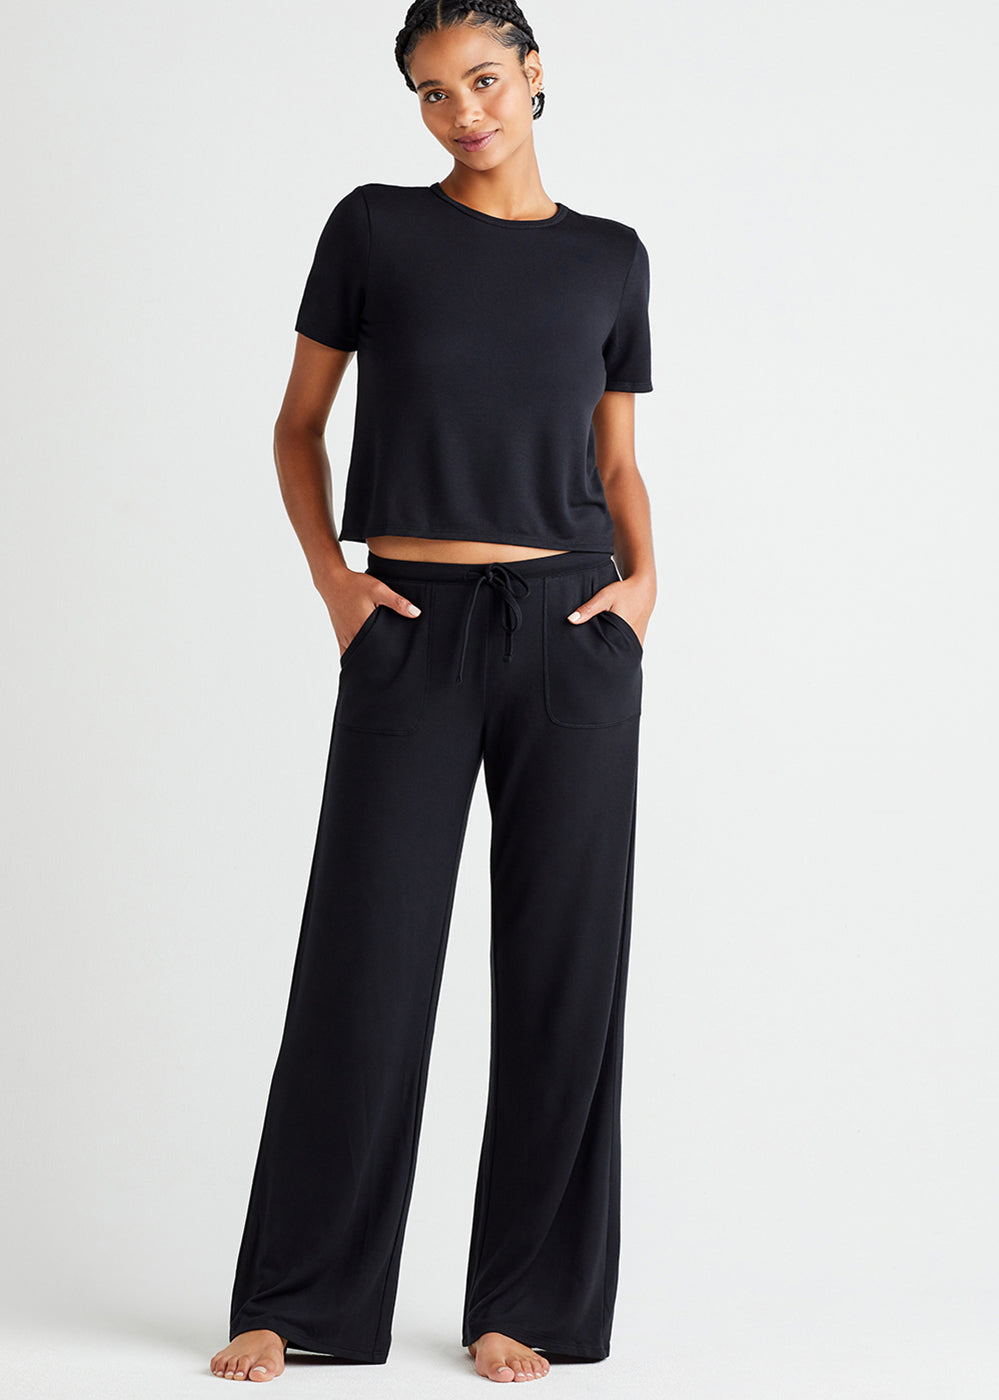 straight leg lounge pant with pockets - baby french terry and peek-a-boo twist back lounge top - baby french terry in Black worn by a woman standing facing forward with hands in pockets Yummie